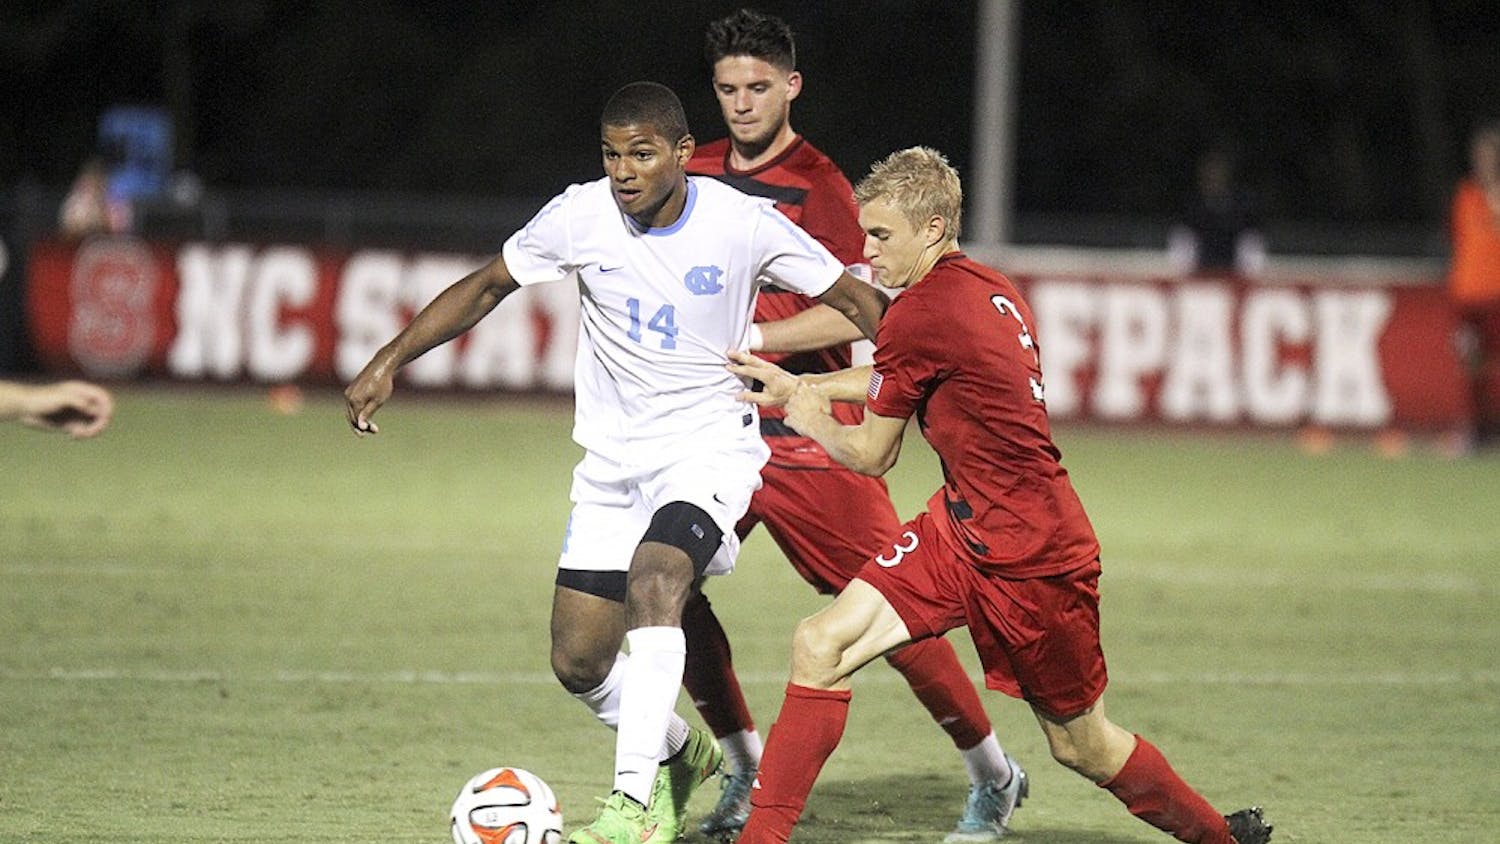 The UNC men's soccer team defeated NC State 1-0 in Raleigh on Friday. 